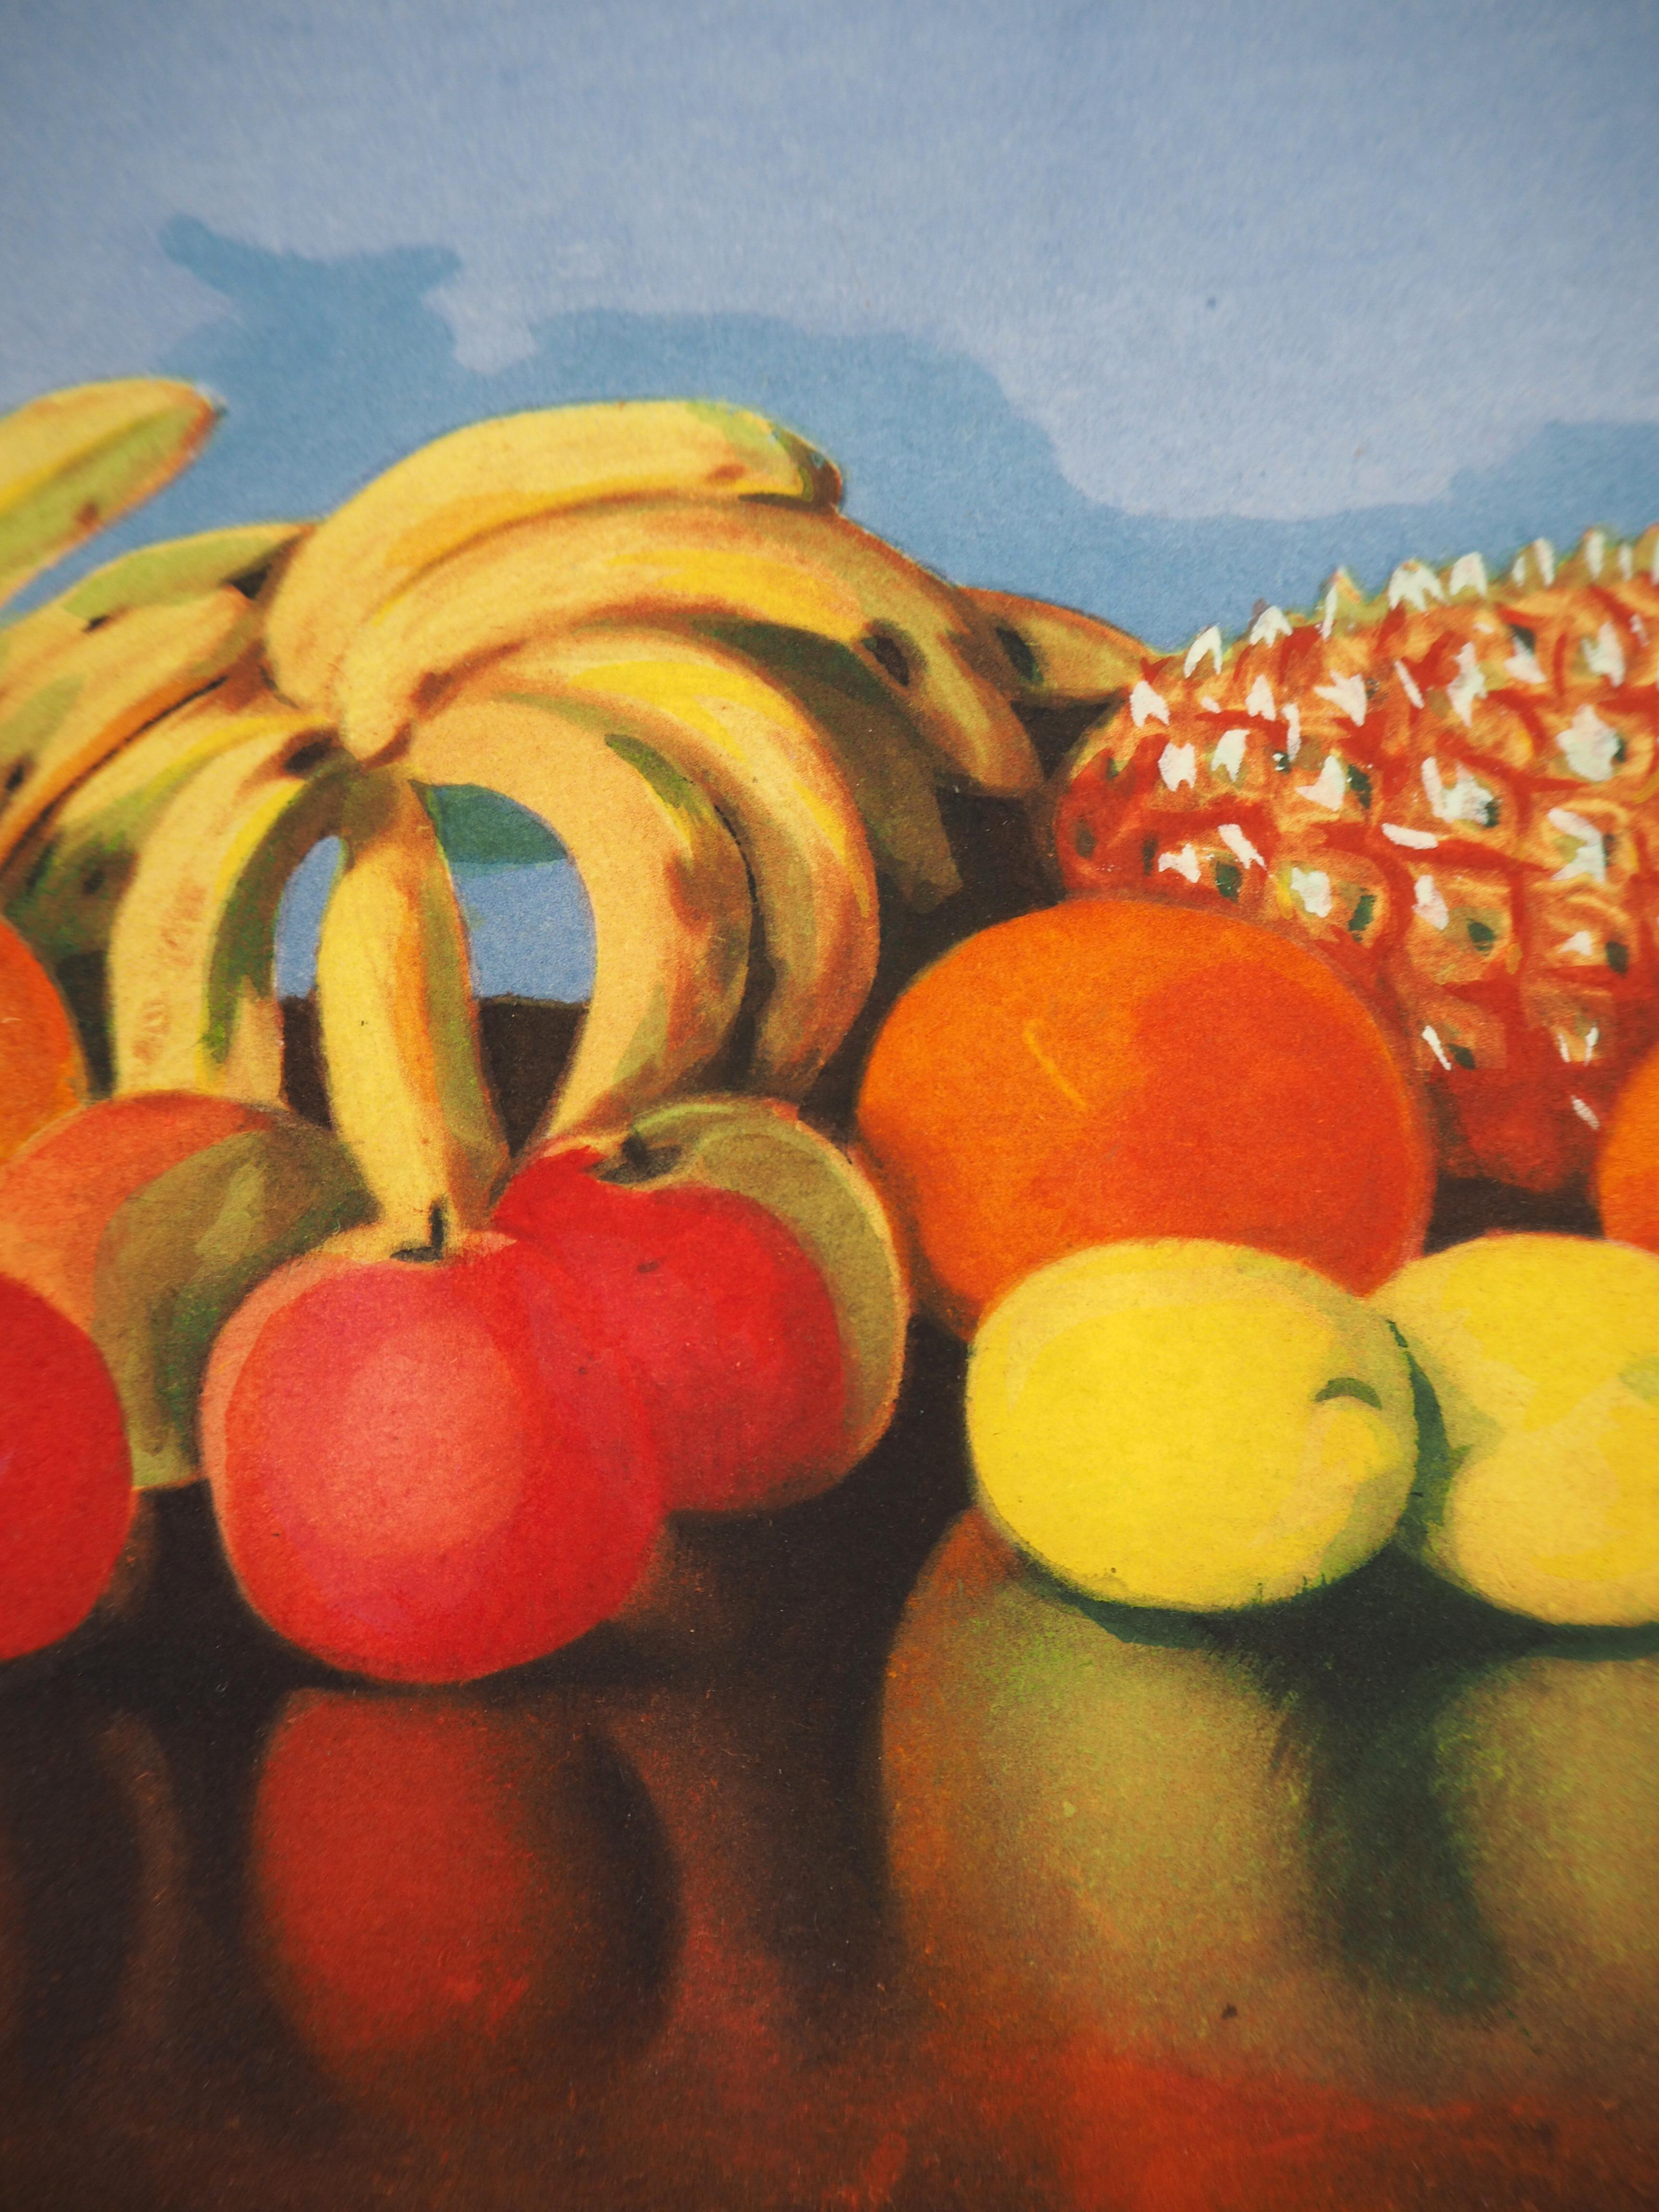 Table of Summer Fruits - Original Lithograph - Modern Print by Moise Kisling